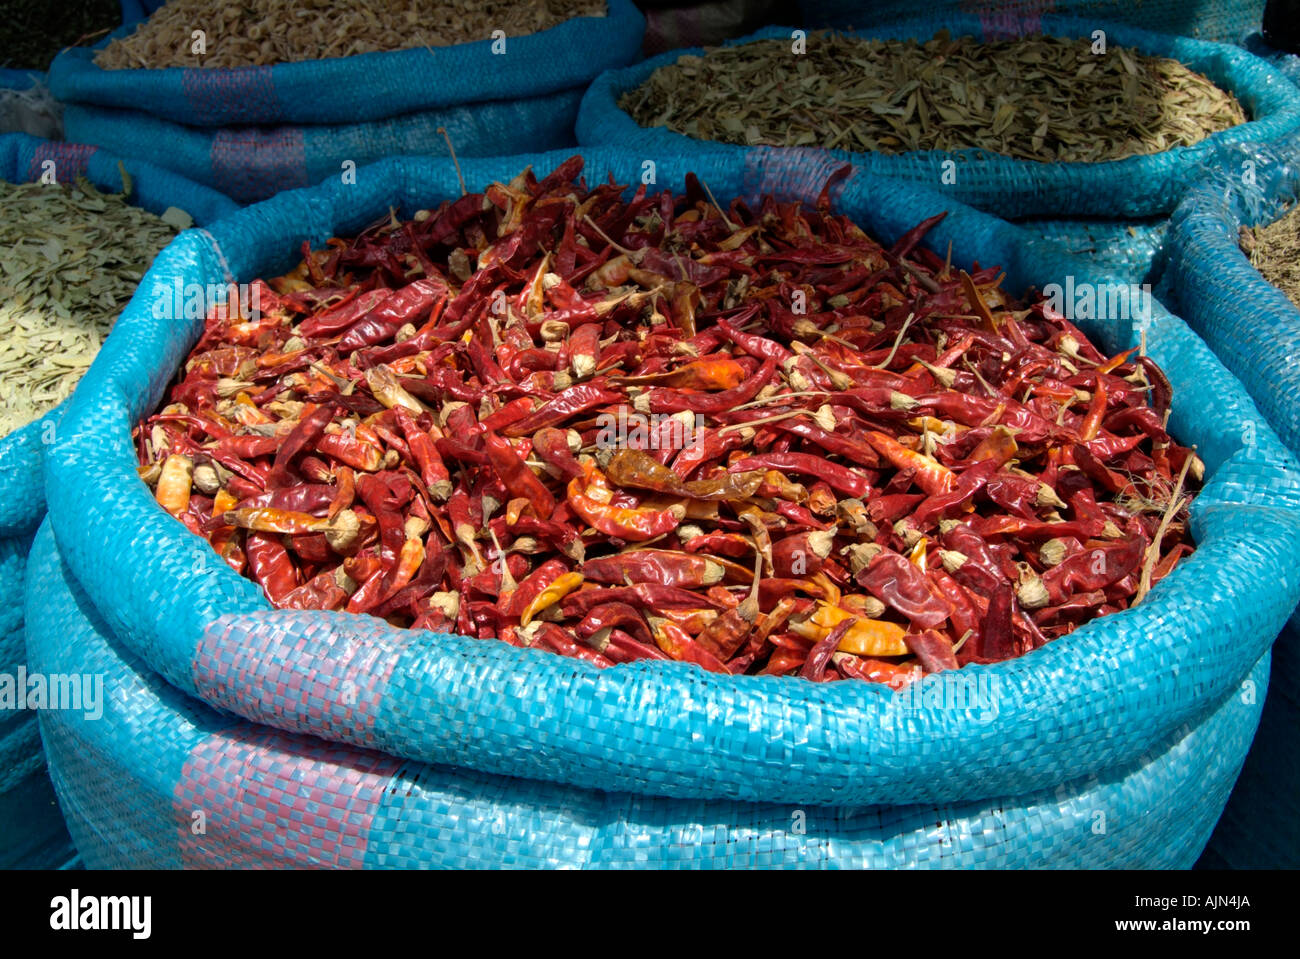 Blue sacks filled with spices and dried herbs for sale in a market in Tangiers Stock Photo